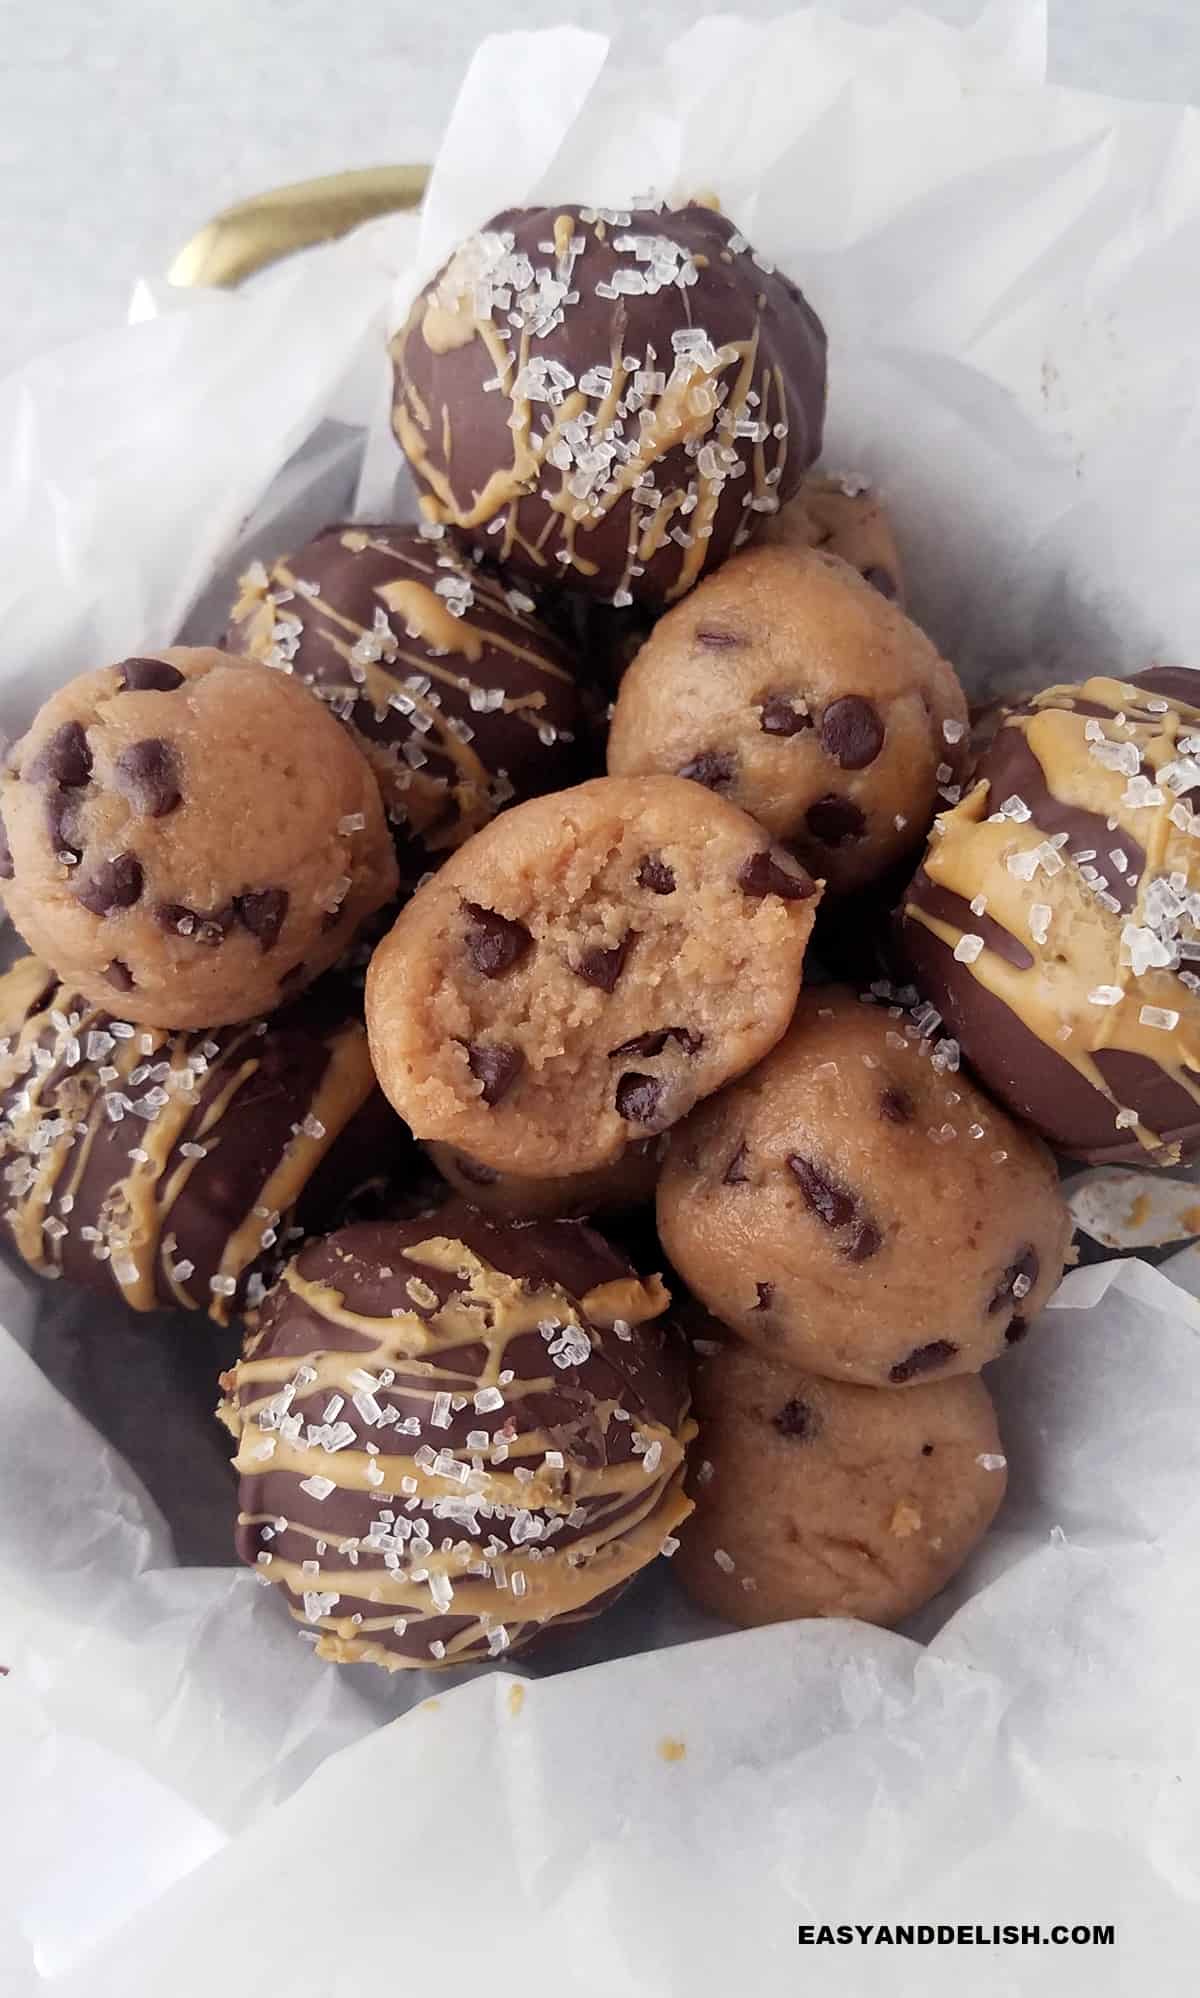 zClose up of a basket full of cookie dough protein balls, some covered in melted chocolate.